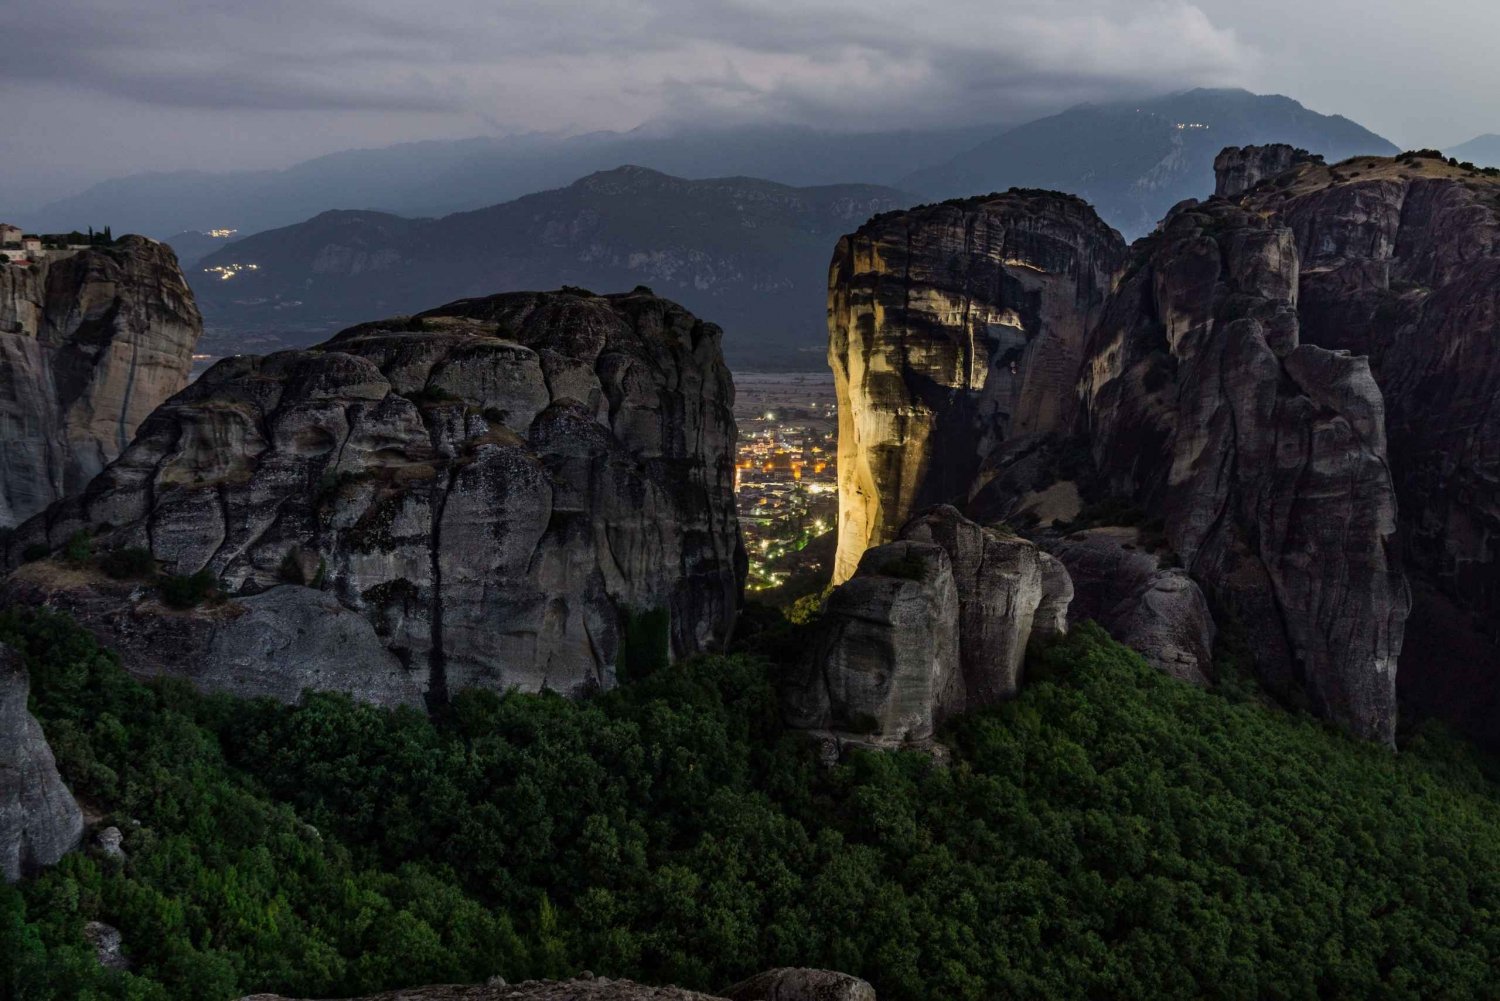 From Athens: Delphi and Meteora 2-Day Tour with Hotel